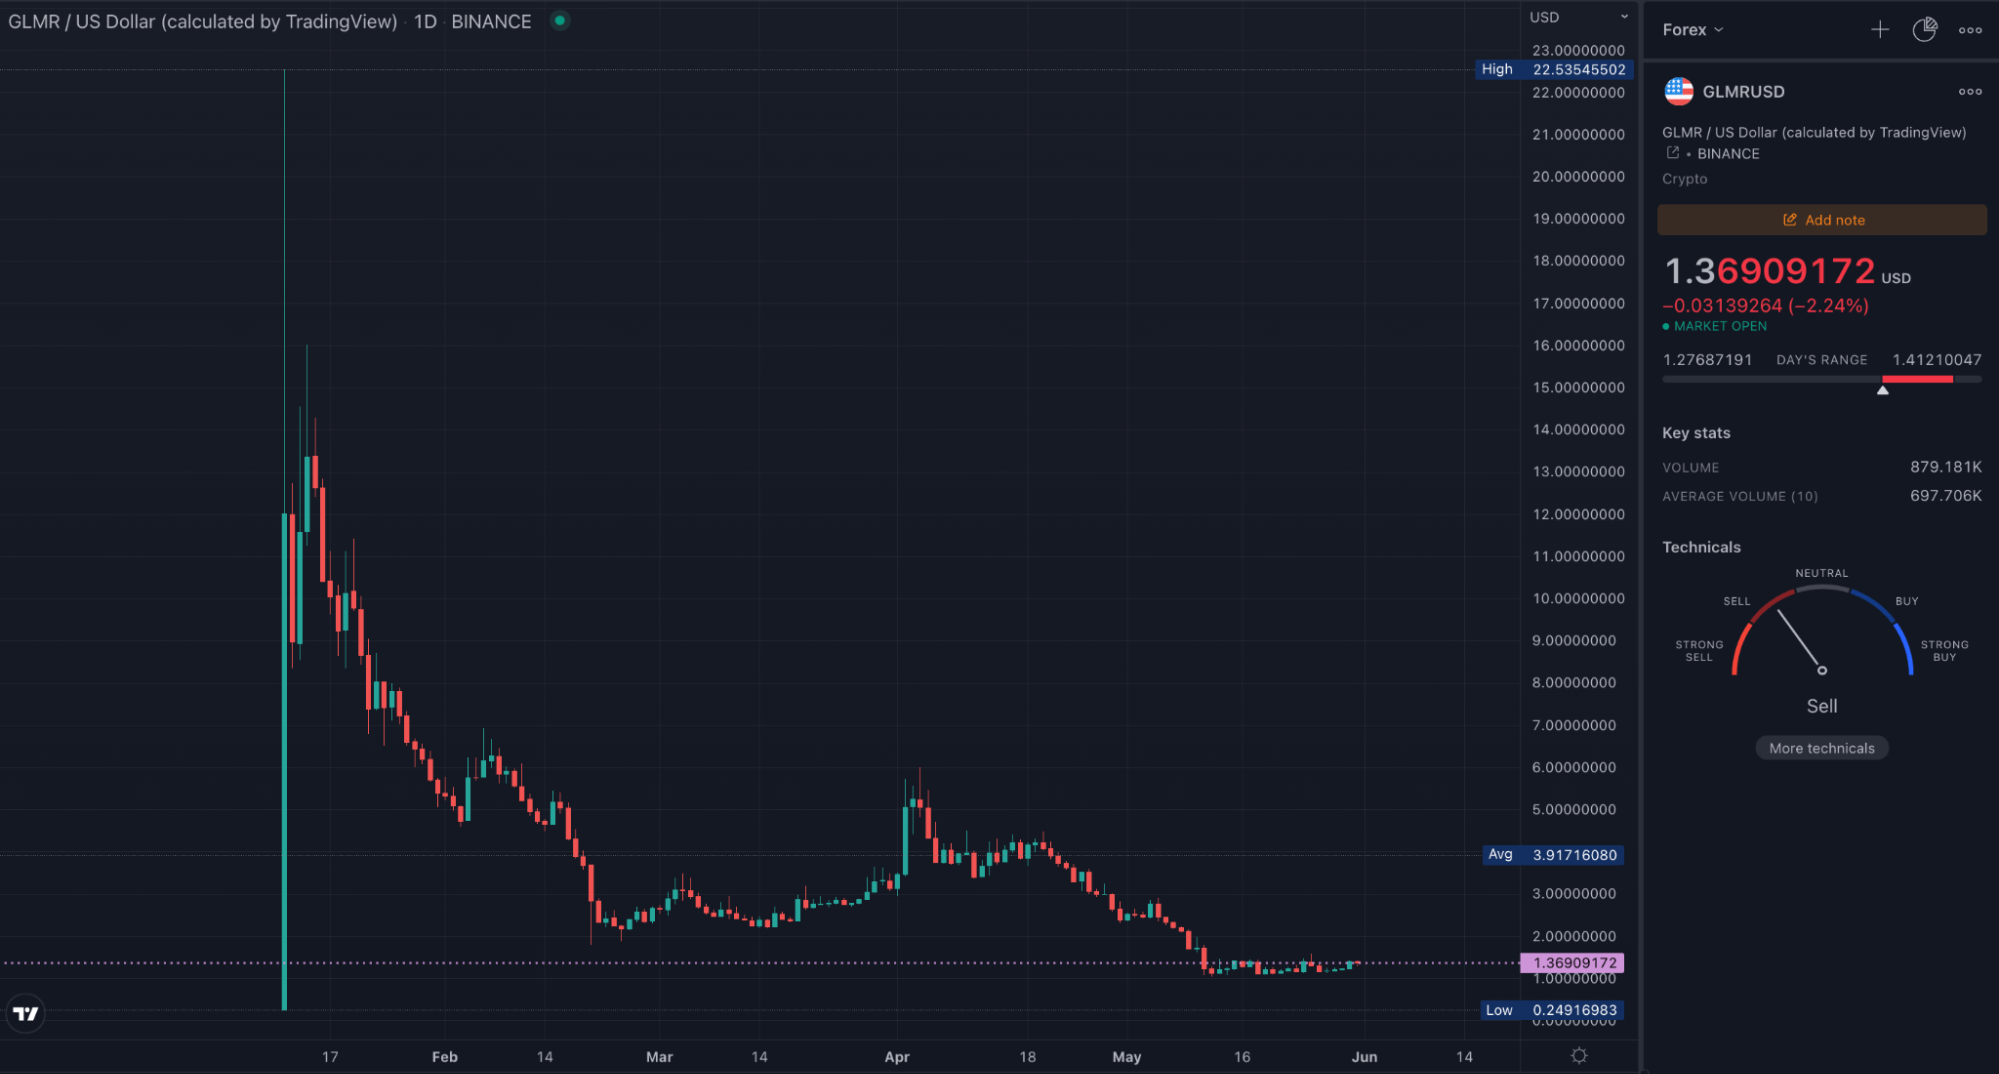 GLMR TradingView daily chart